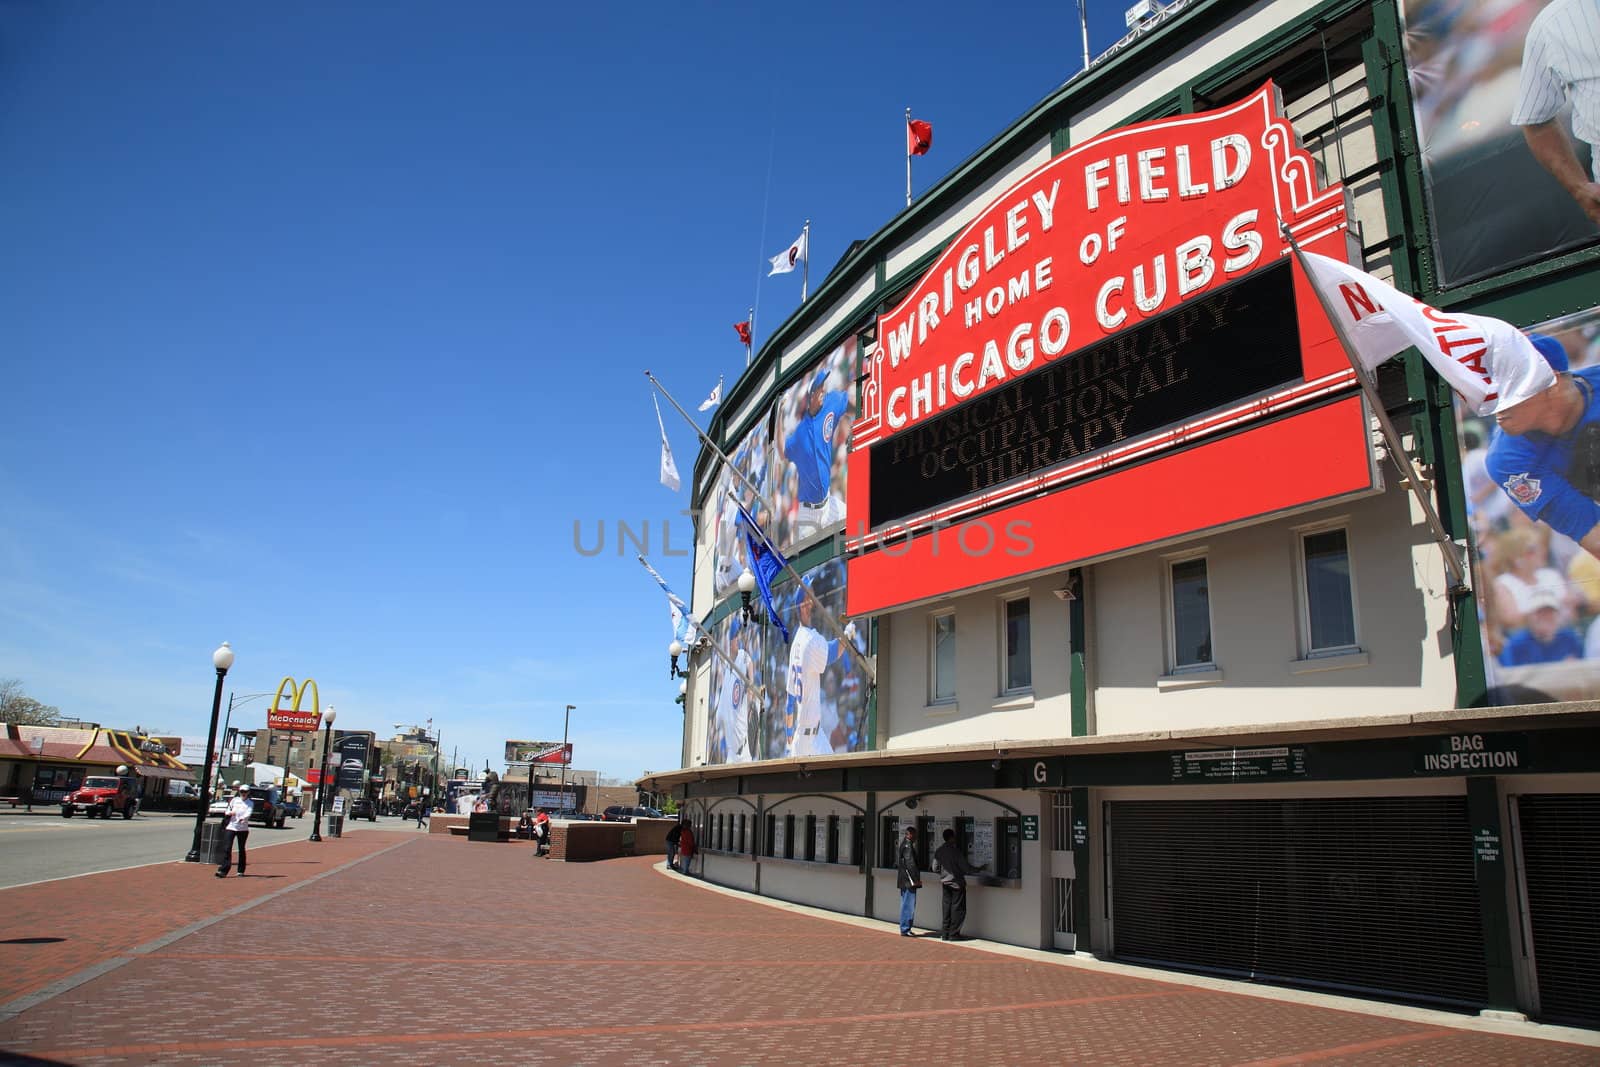 Wrigley Field - Chicago Cubs by Ffooter